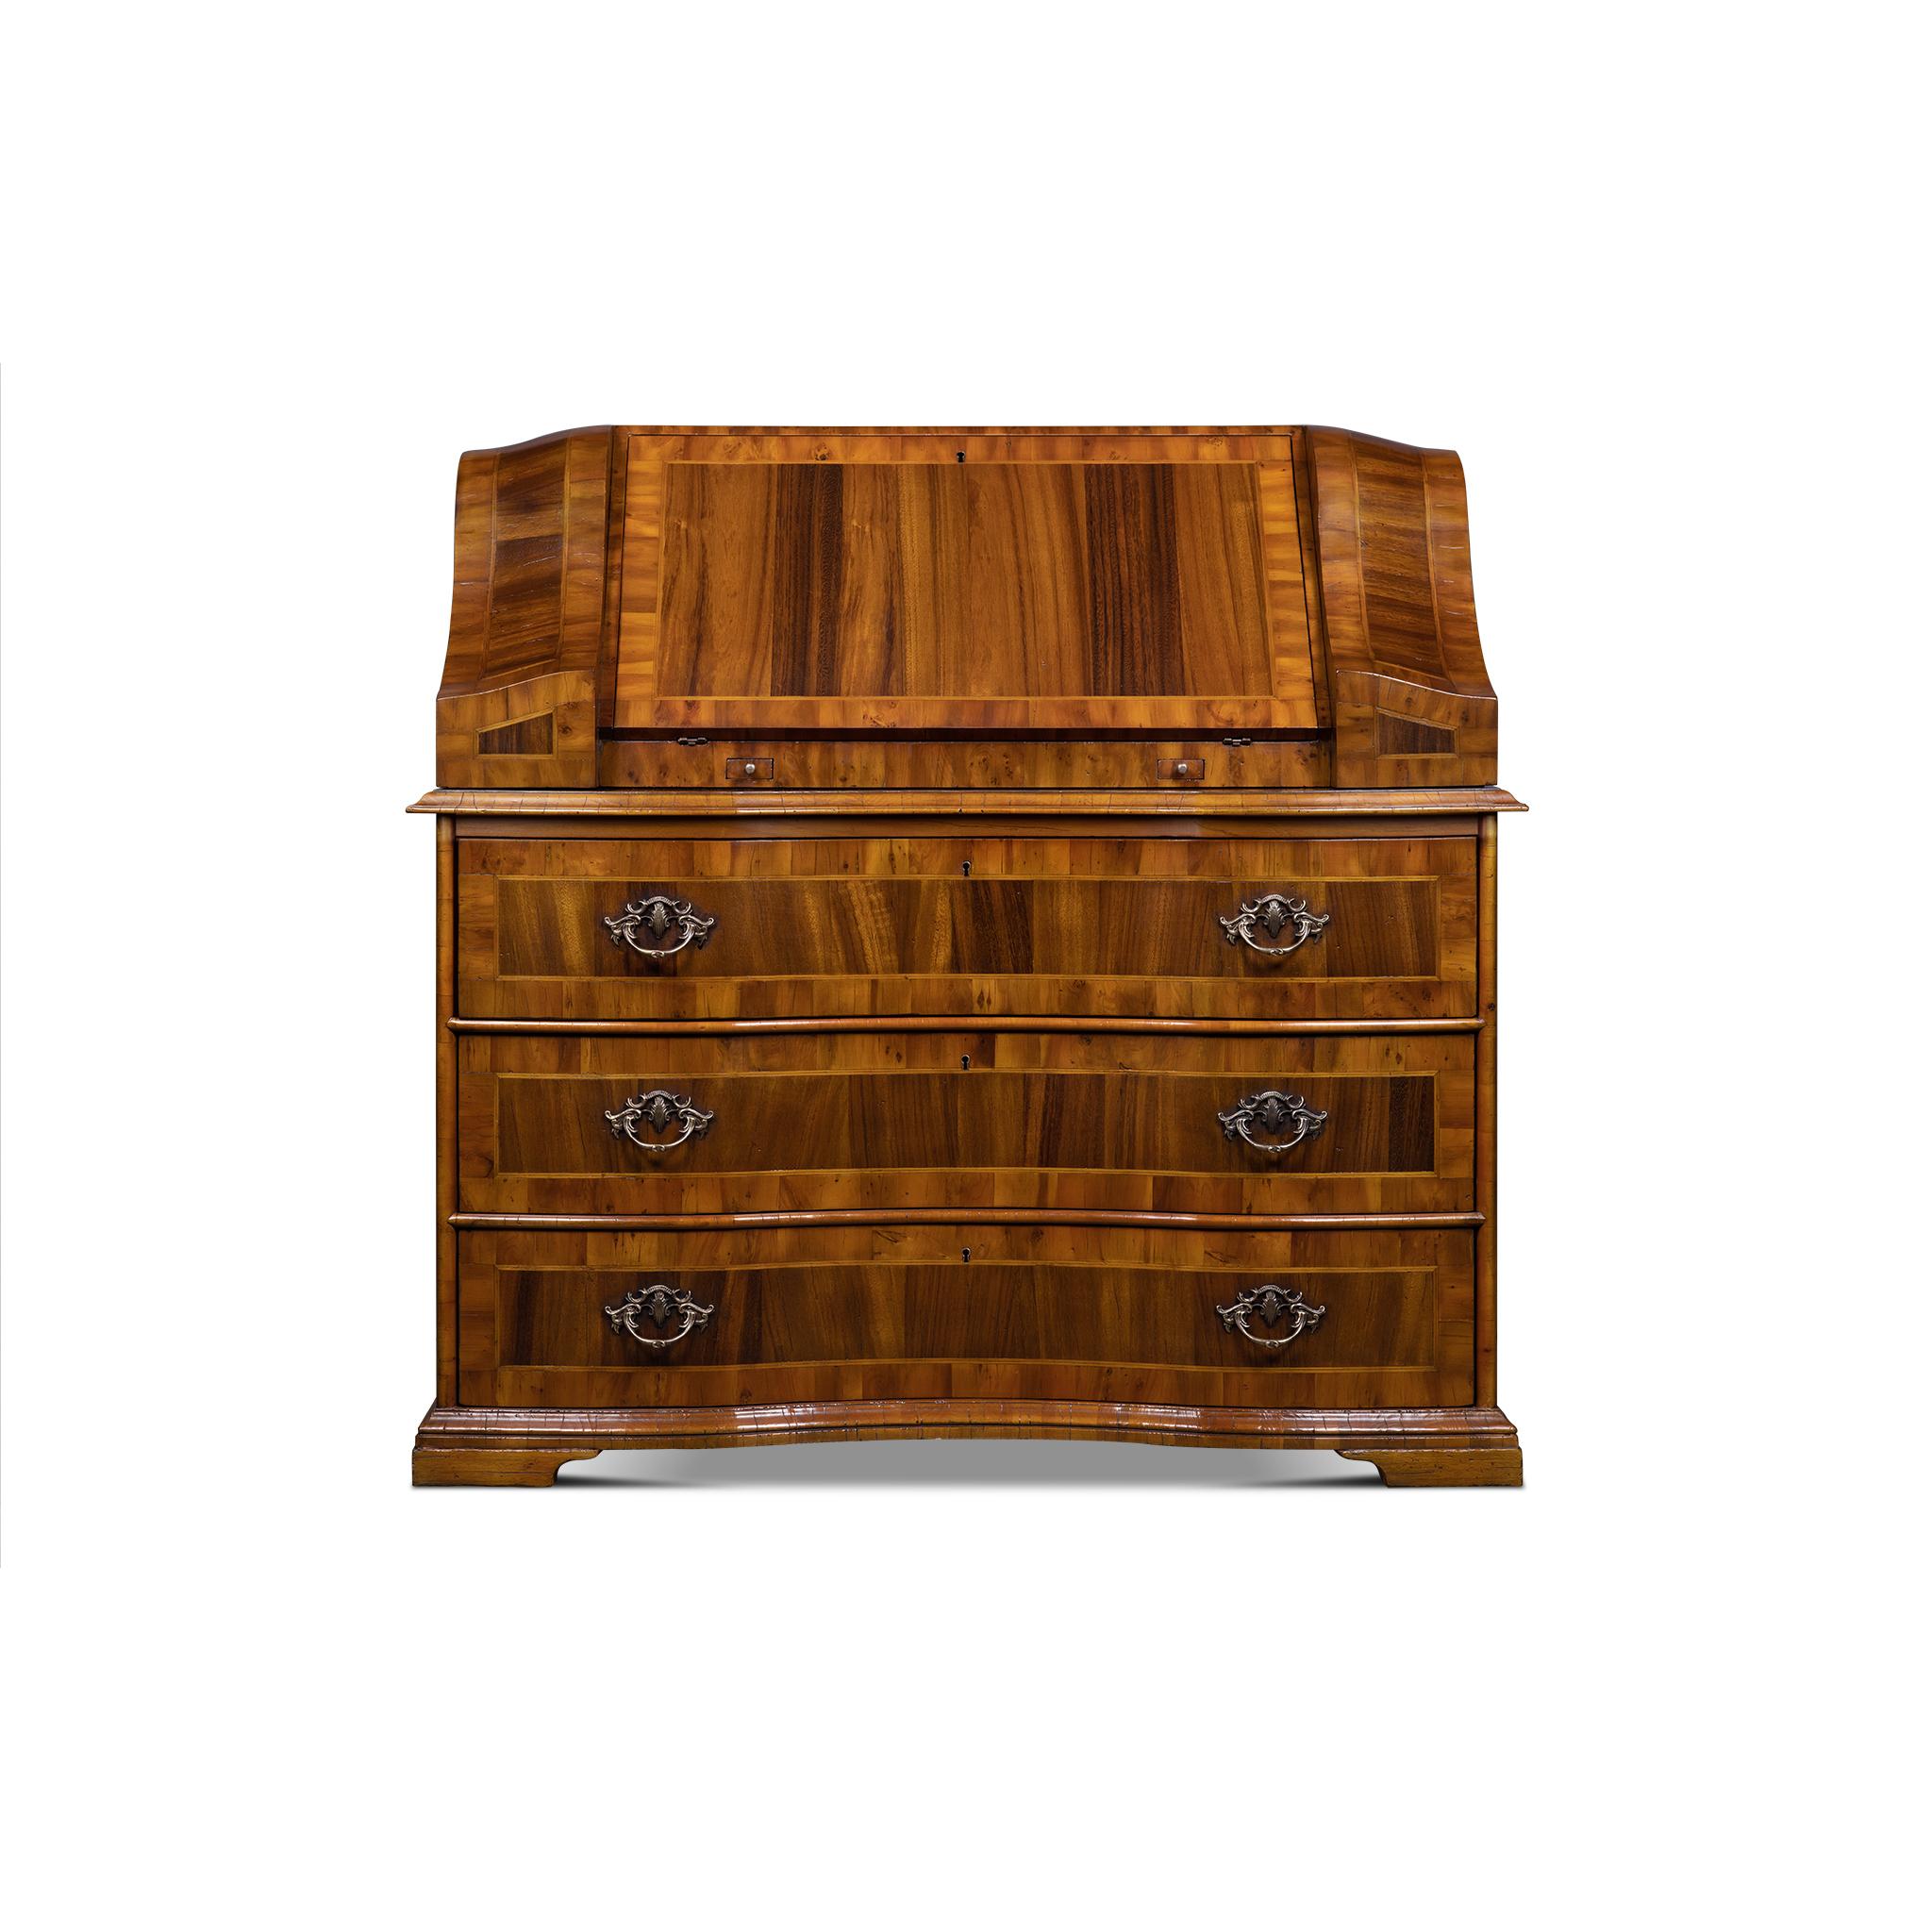 The Amsterdam Chest is inspired by the XVIIIth century German design. Its serpentine front matches the style and design of that time. It has crossed moldings throughout the top and base. It Combines top class materials with beautiful craftsmanship